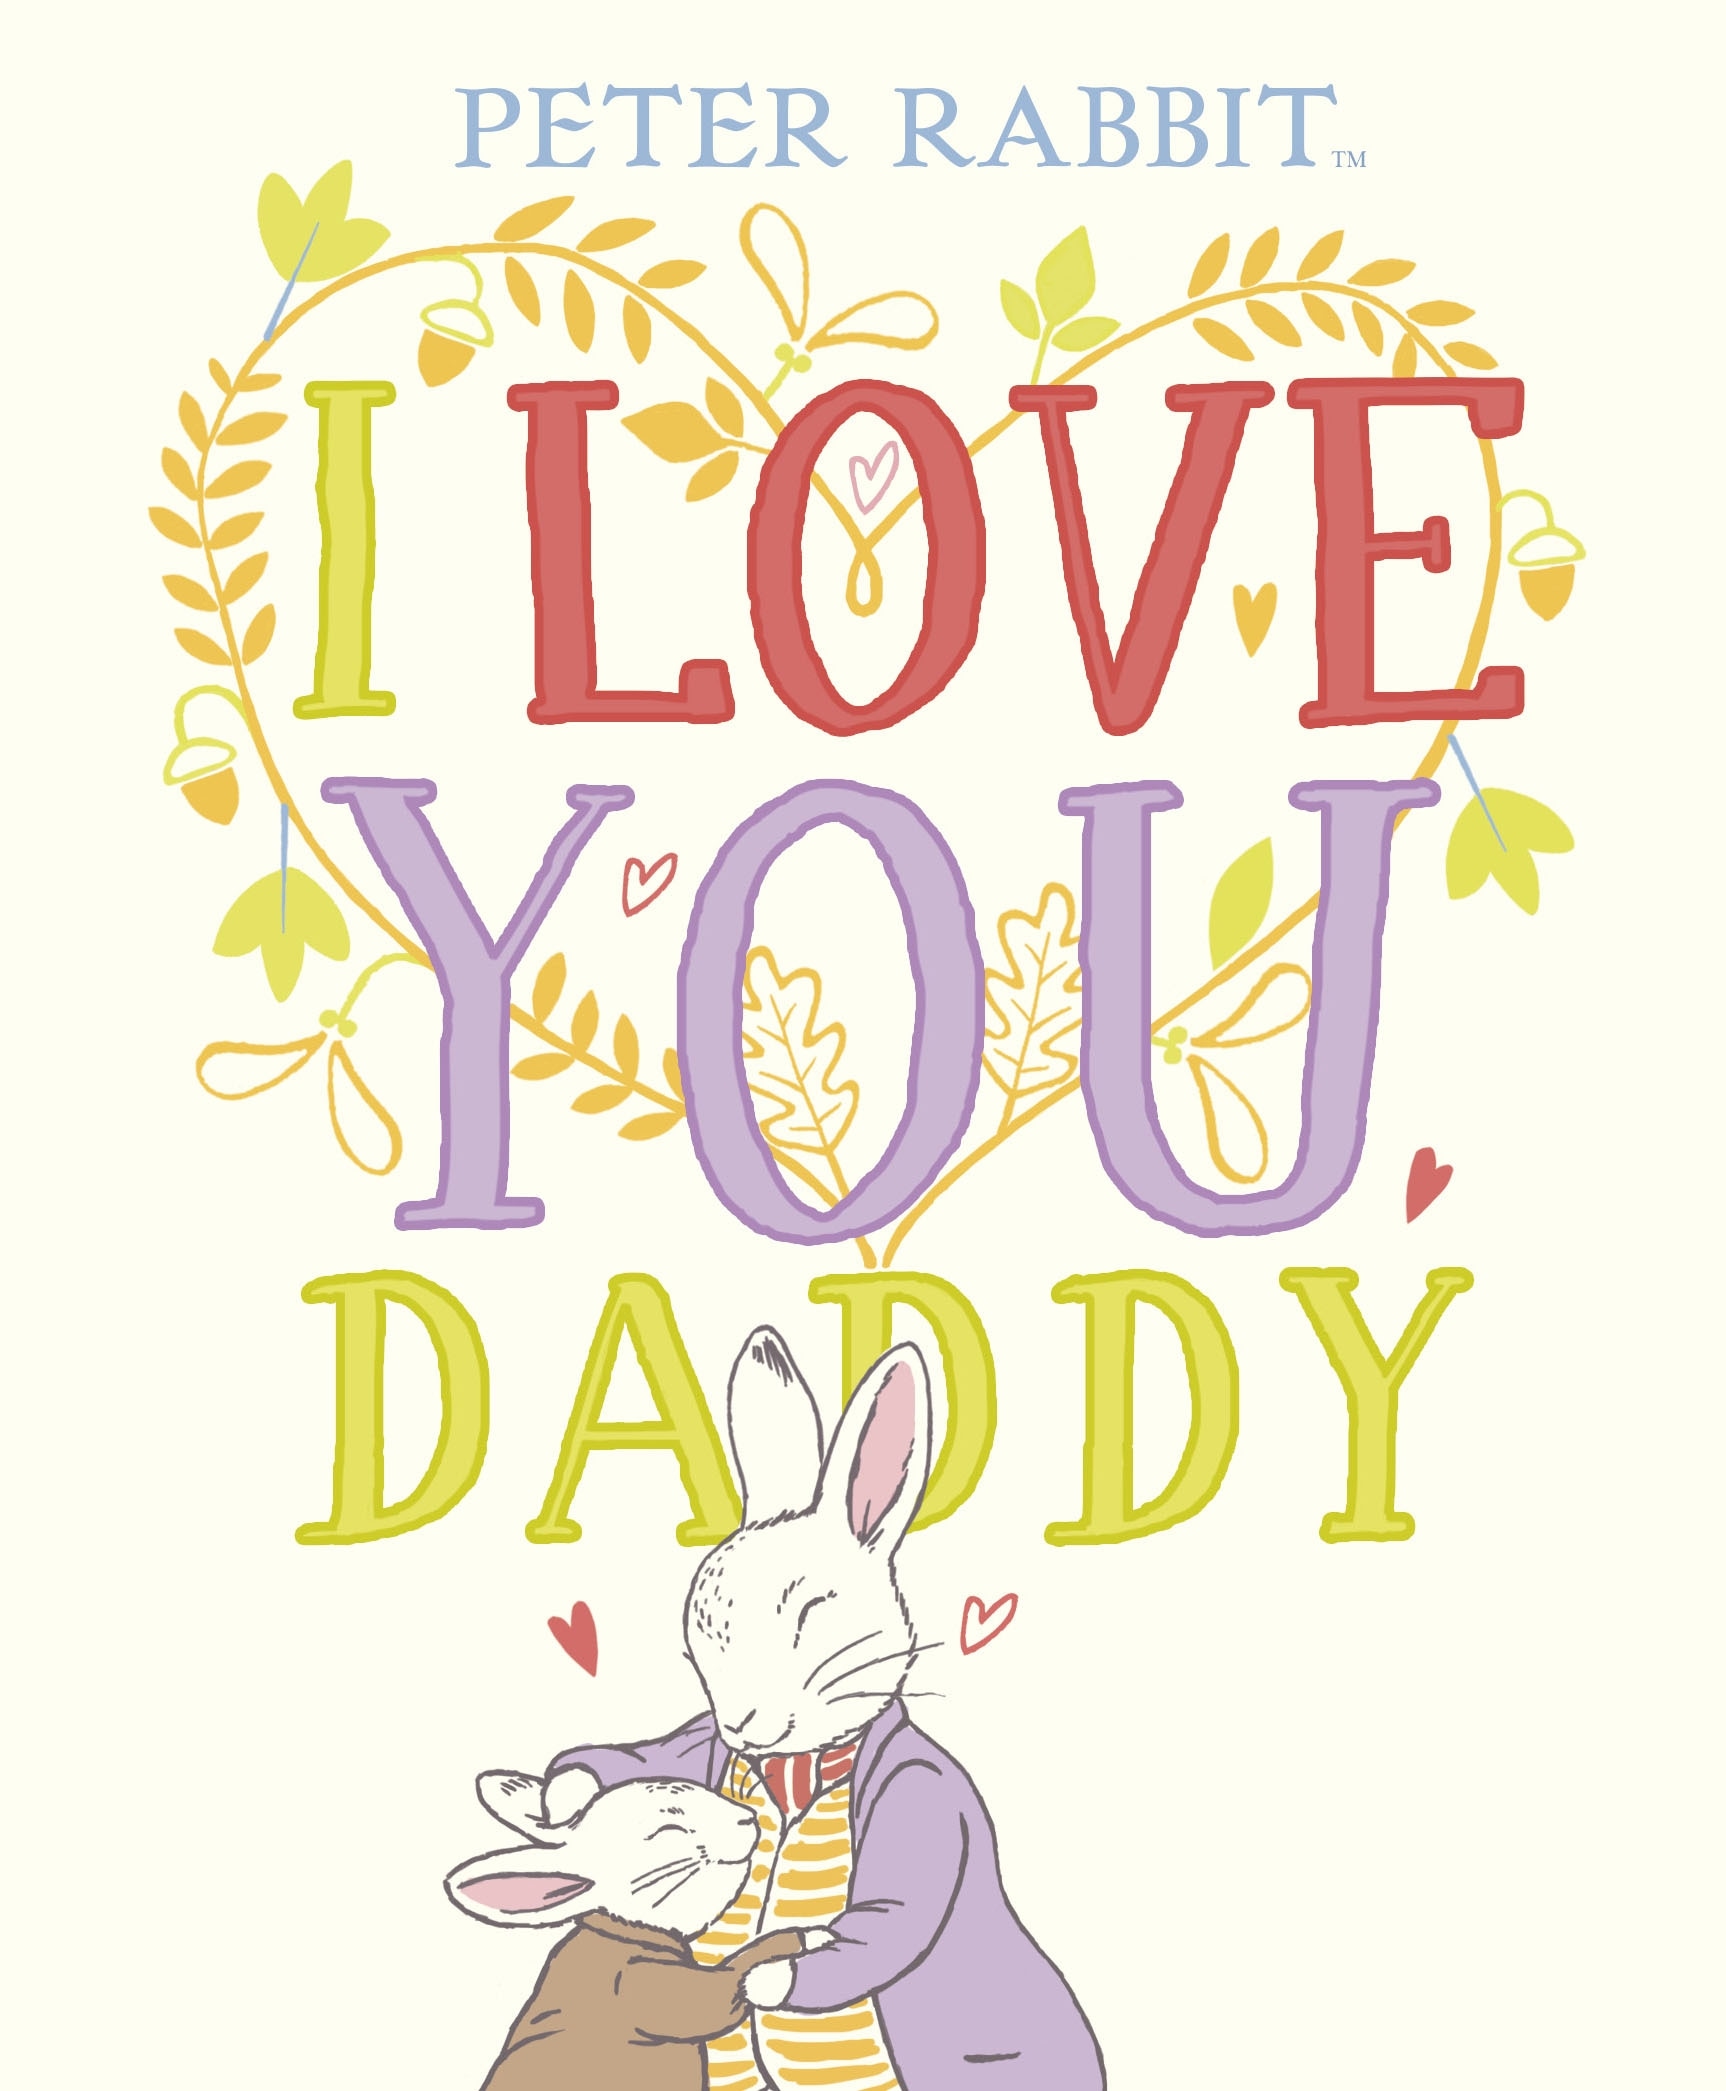 Book “Peter Rabbit I Love You Daddy” by Beatrix Potter — May 14, 2020